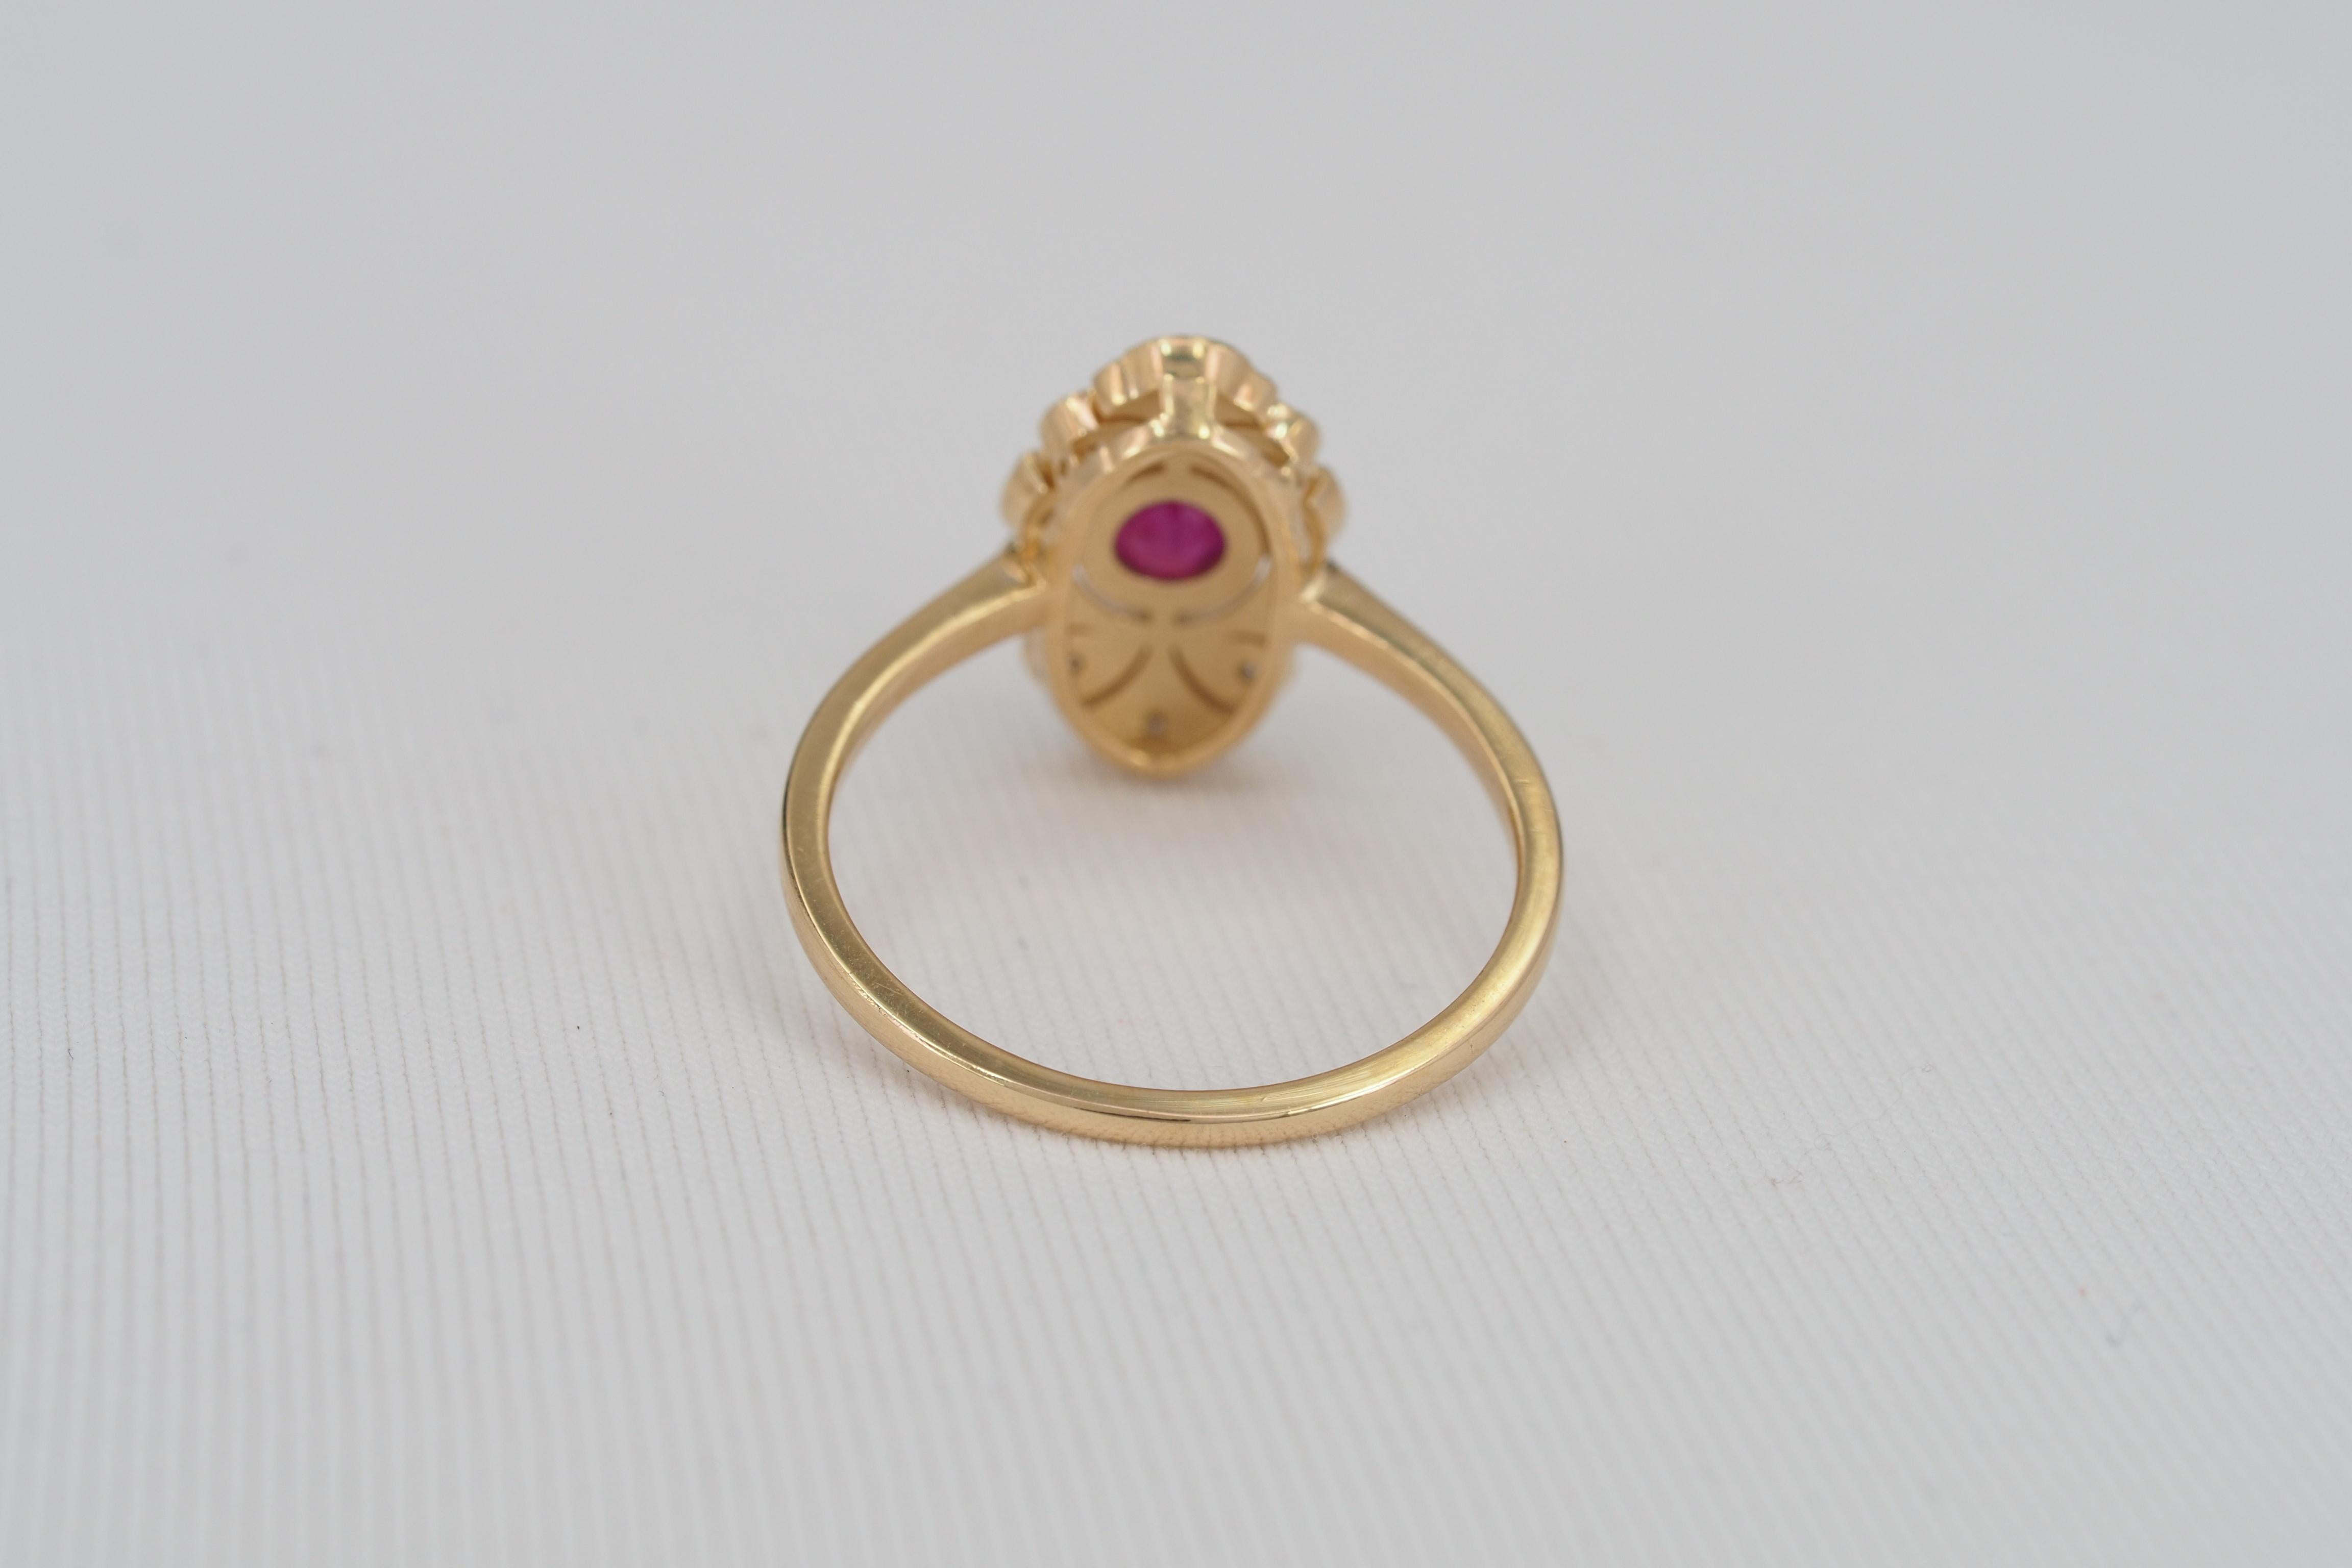 For Sale:  14 karat Gold Ring with Ruby and Diamonds, Vintage Inspired Ring.  6